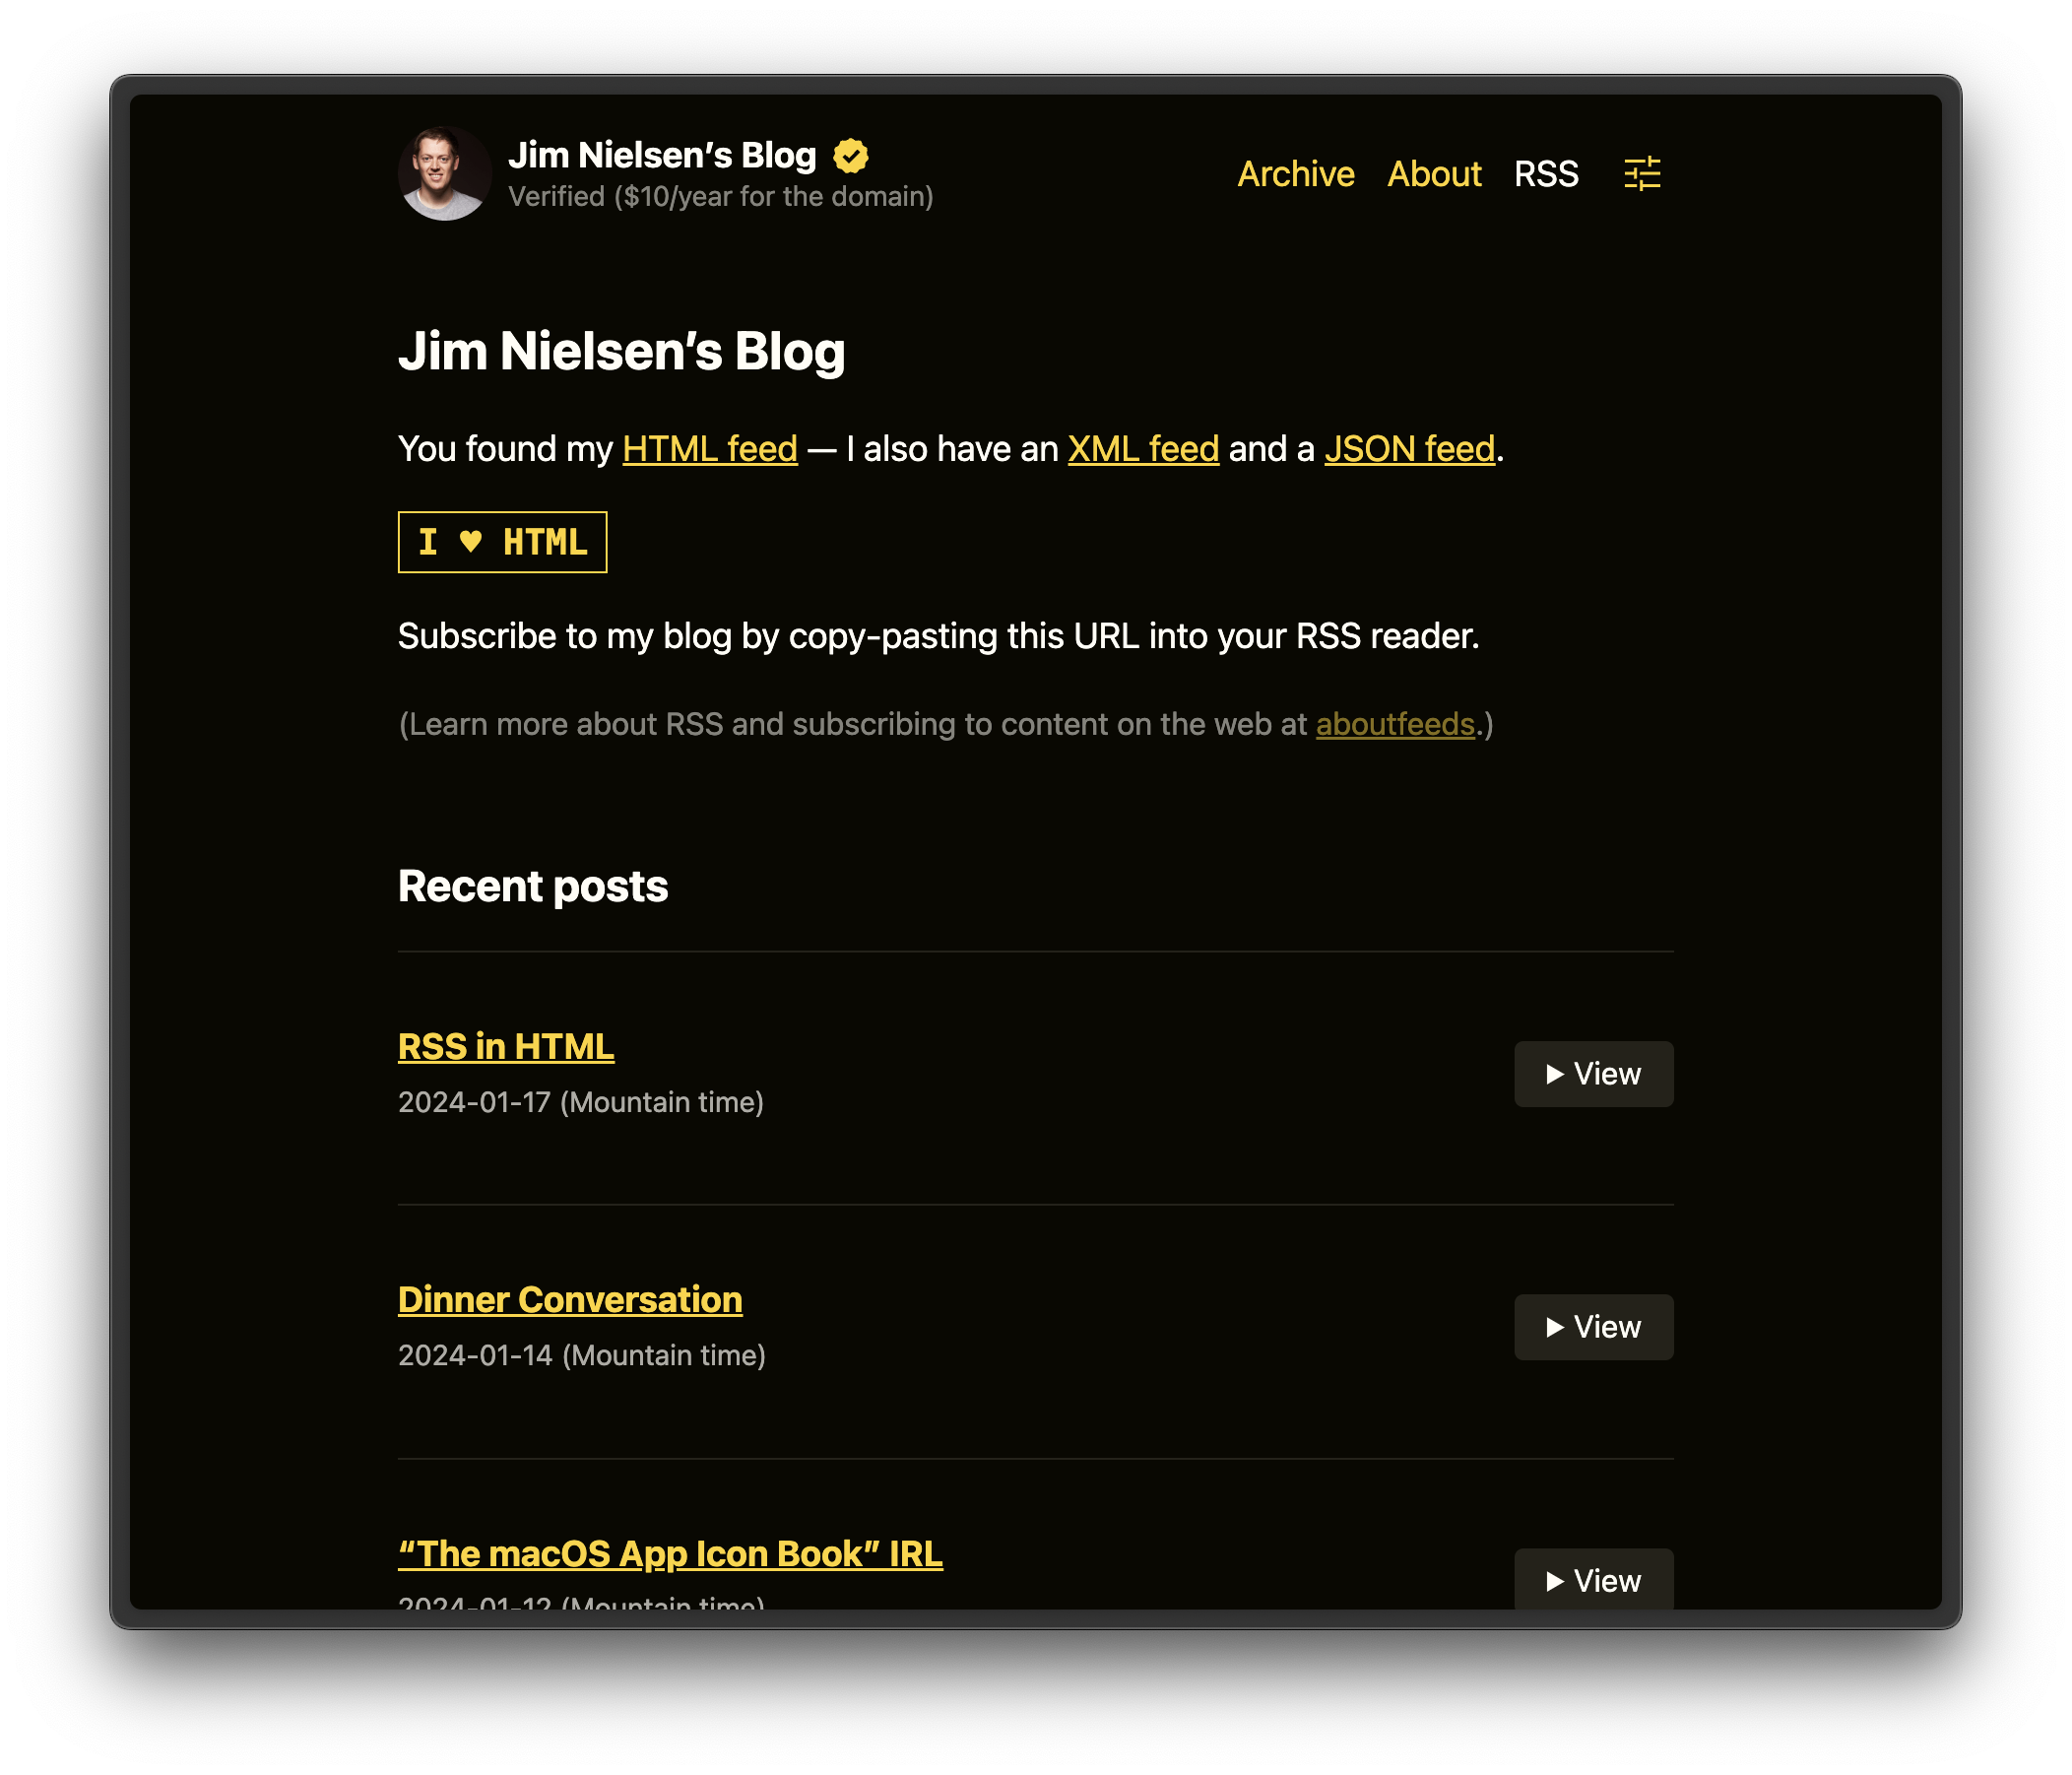 Screenshot of the HTML feed page on blog.jim-nielsen.com